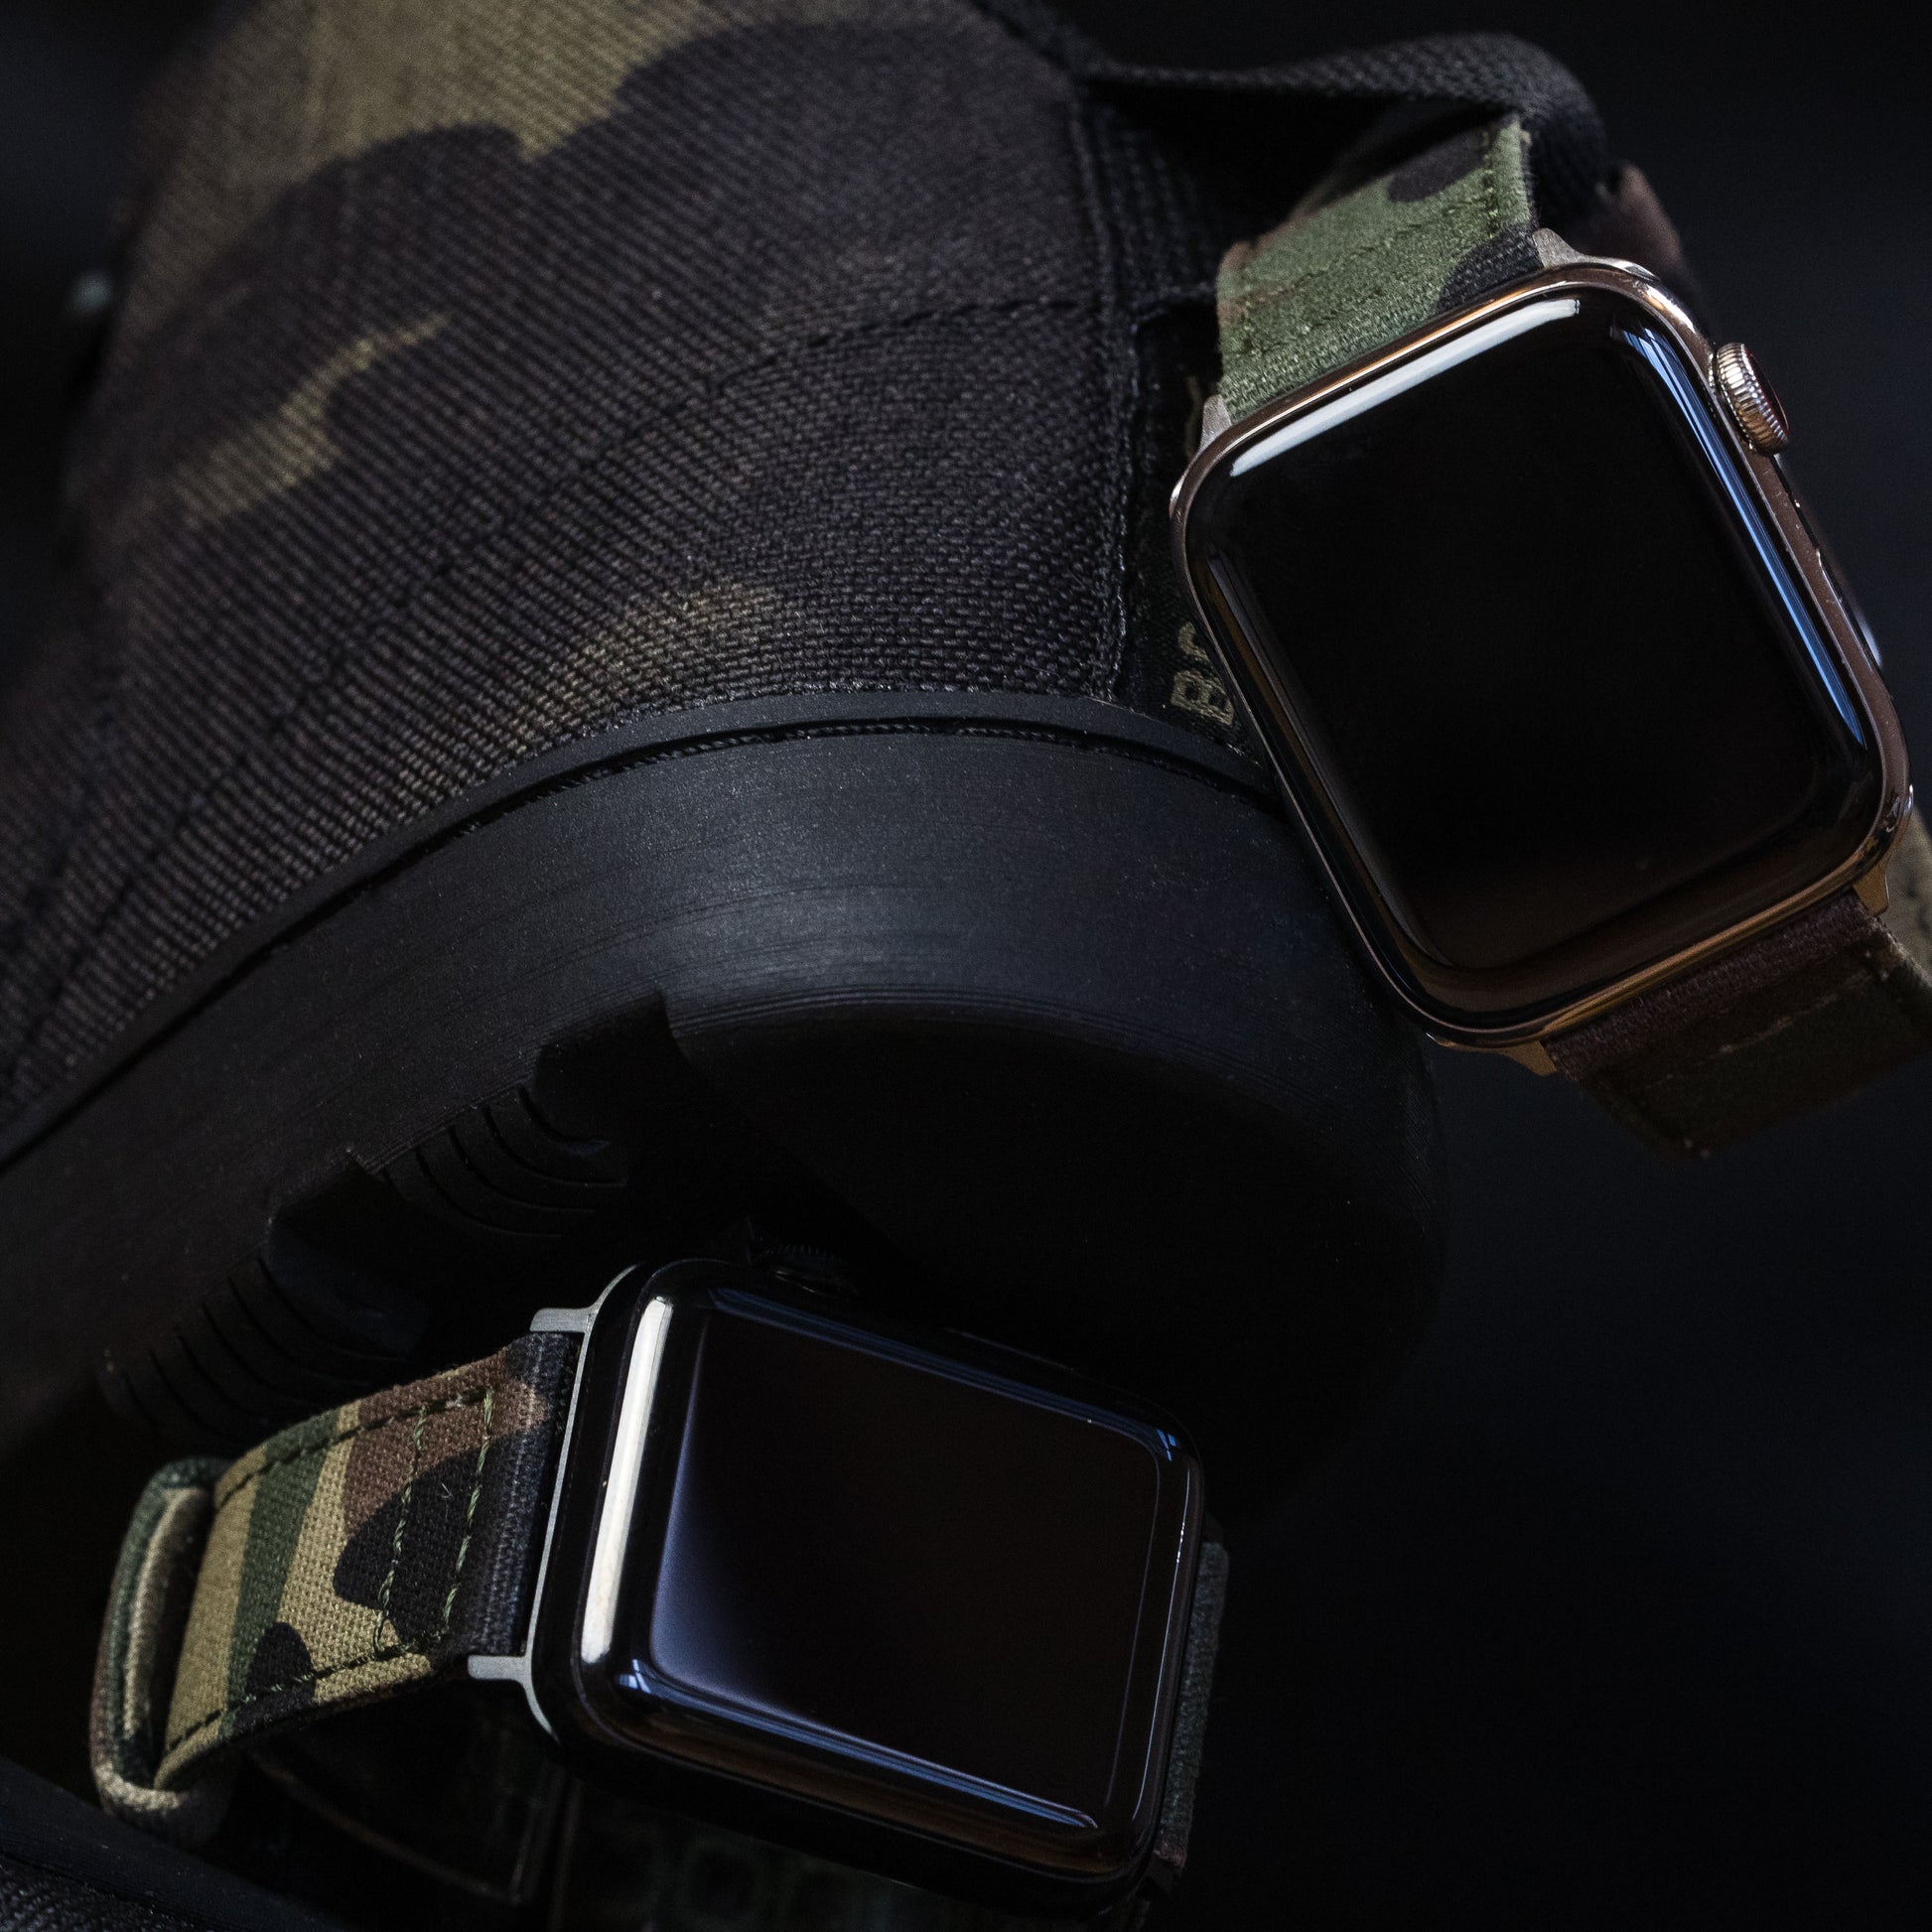 Apple Watch | Camouflage Canvas - Barton Watch Bands